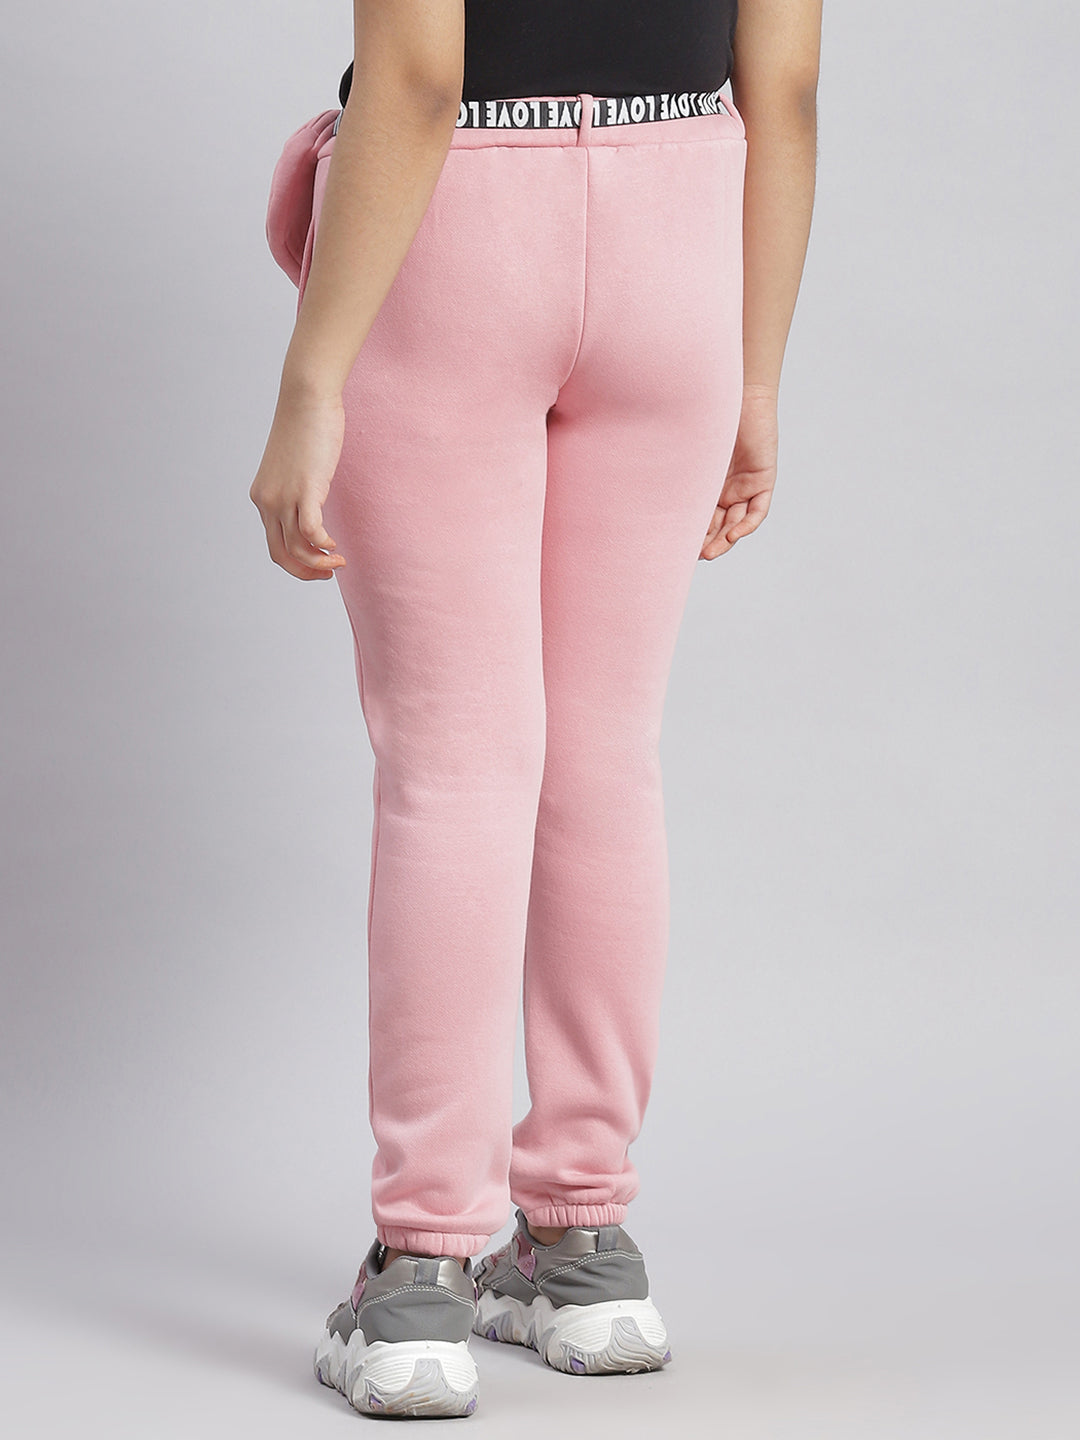 Girls Pink Solid Regular Fit Lowers